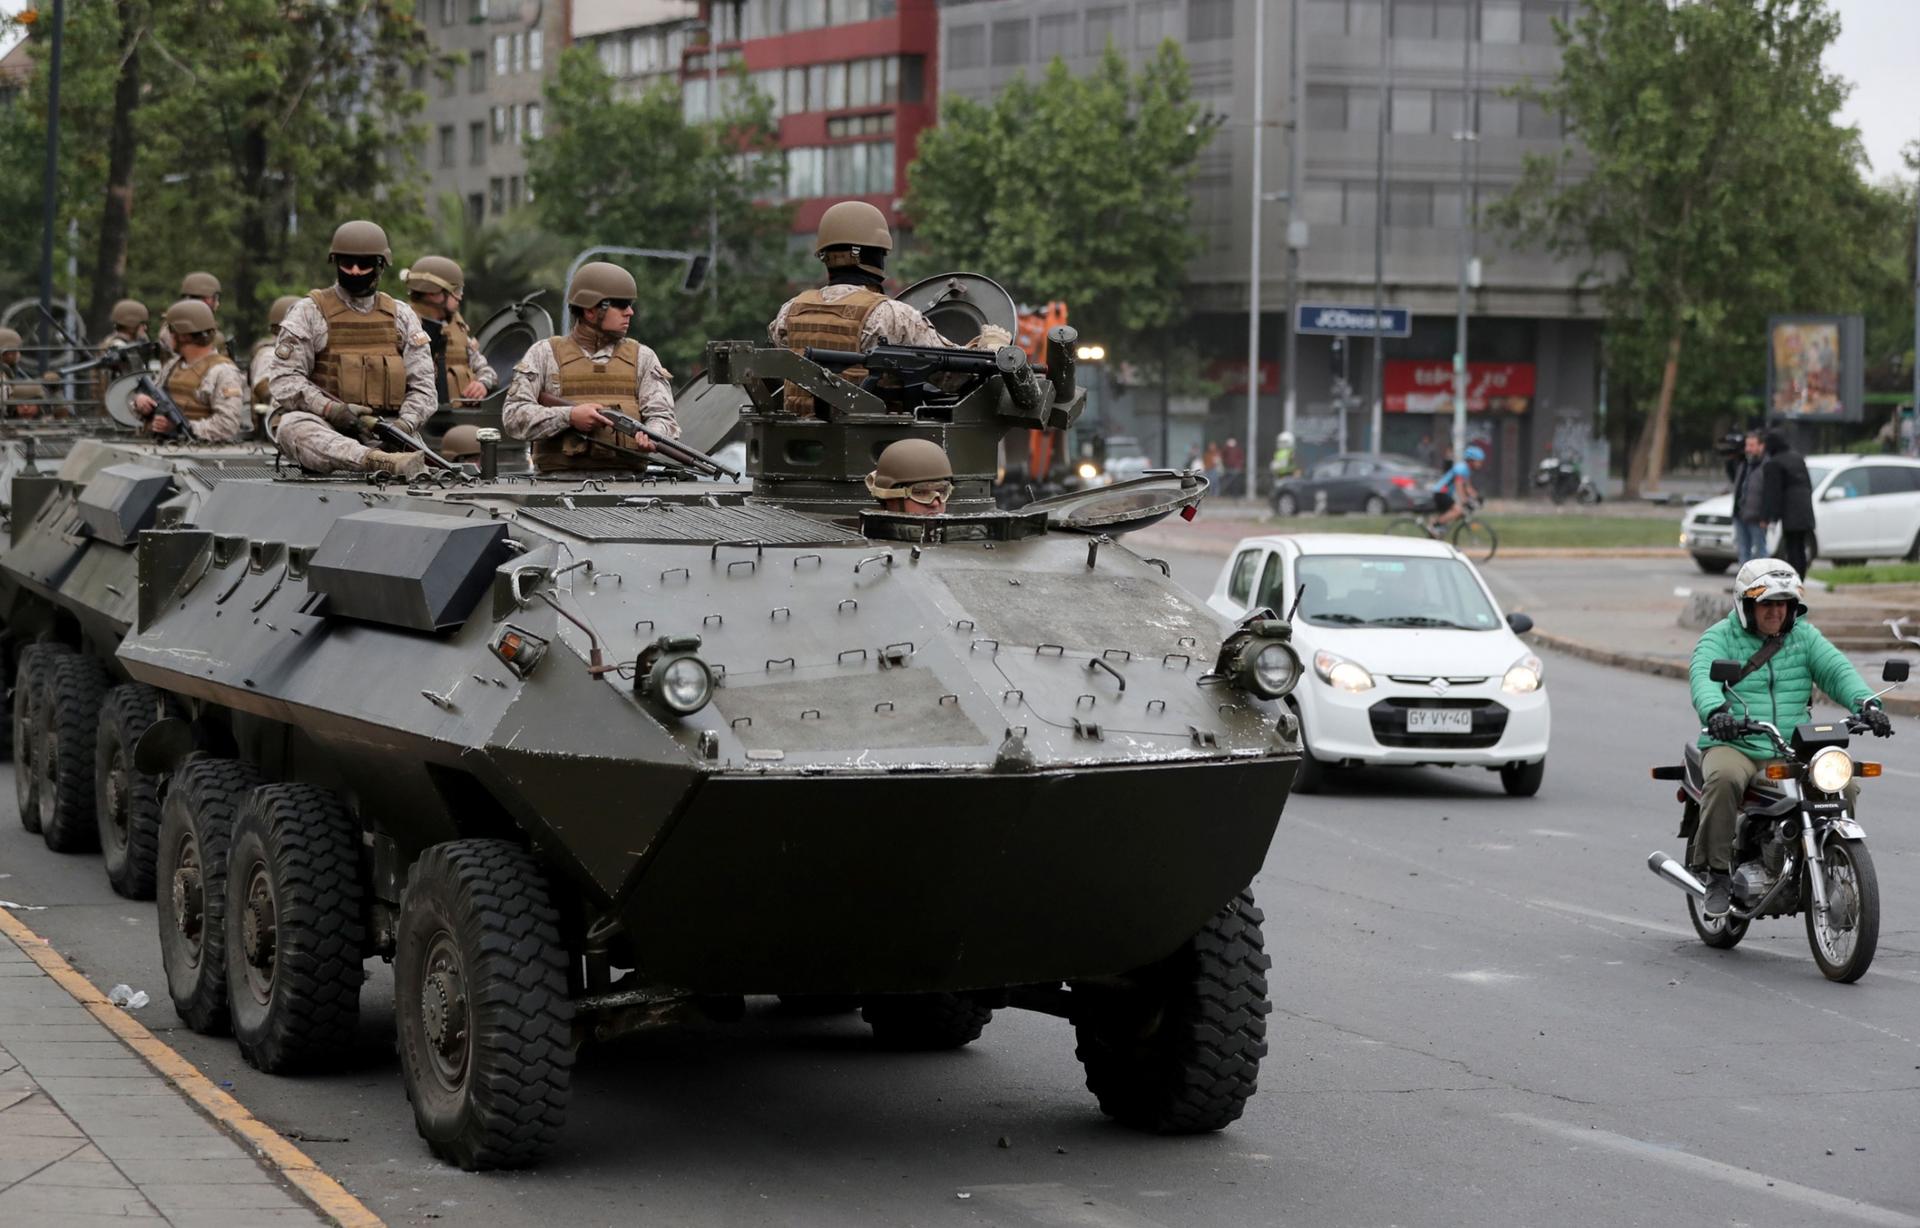 A line of armored transporter trucks are shown with armed soldiers riding on top and a man on a motorcycle passing by.